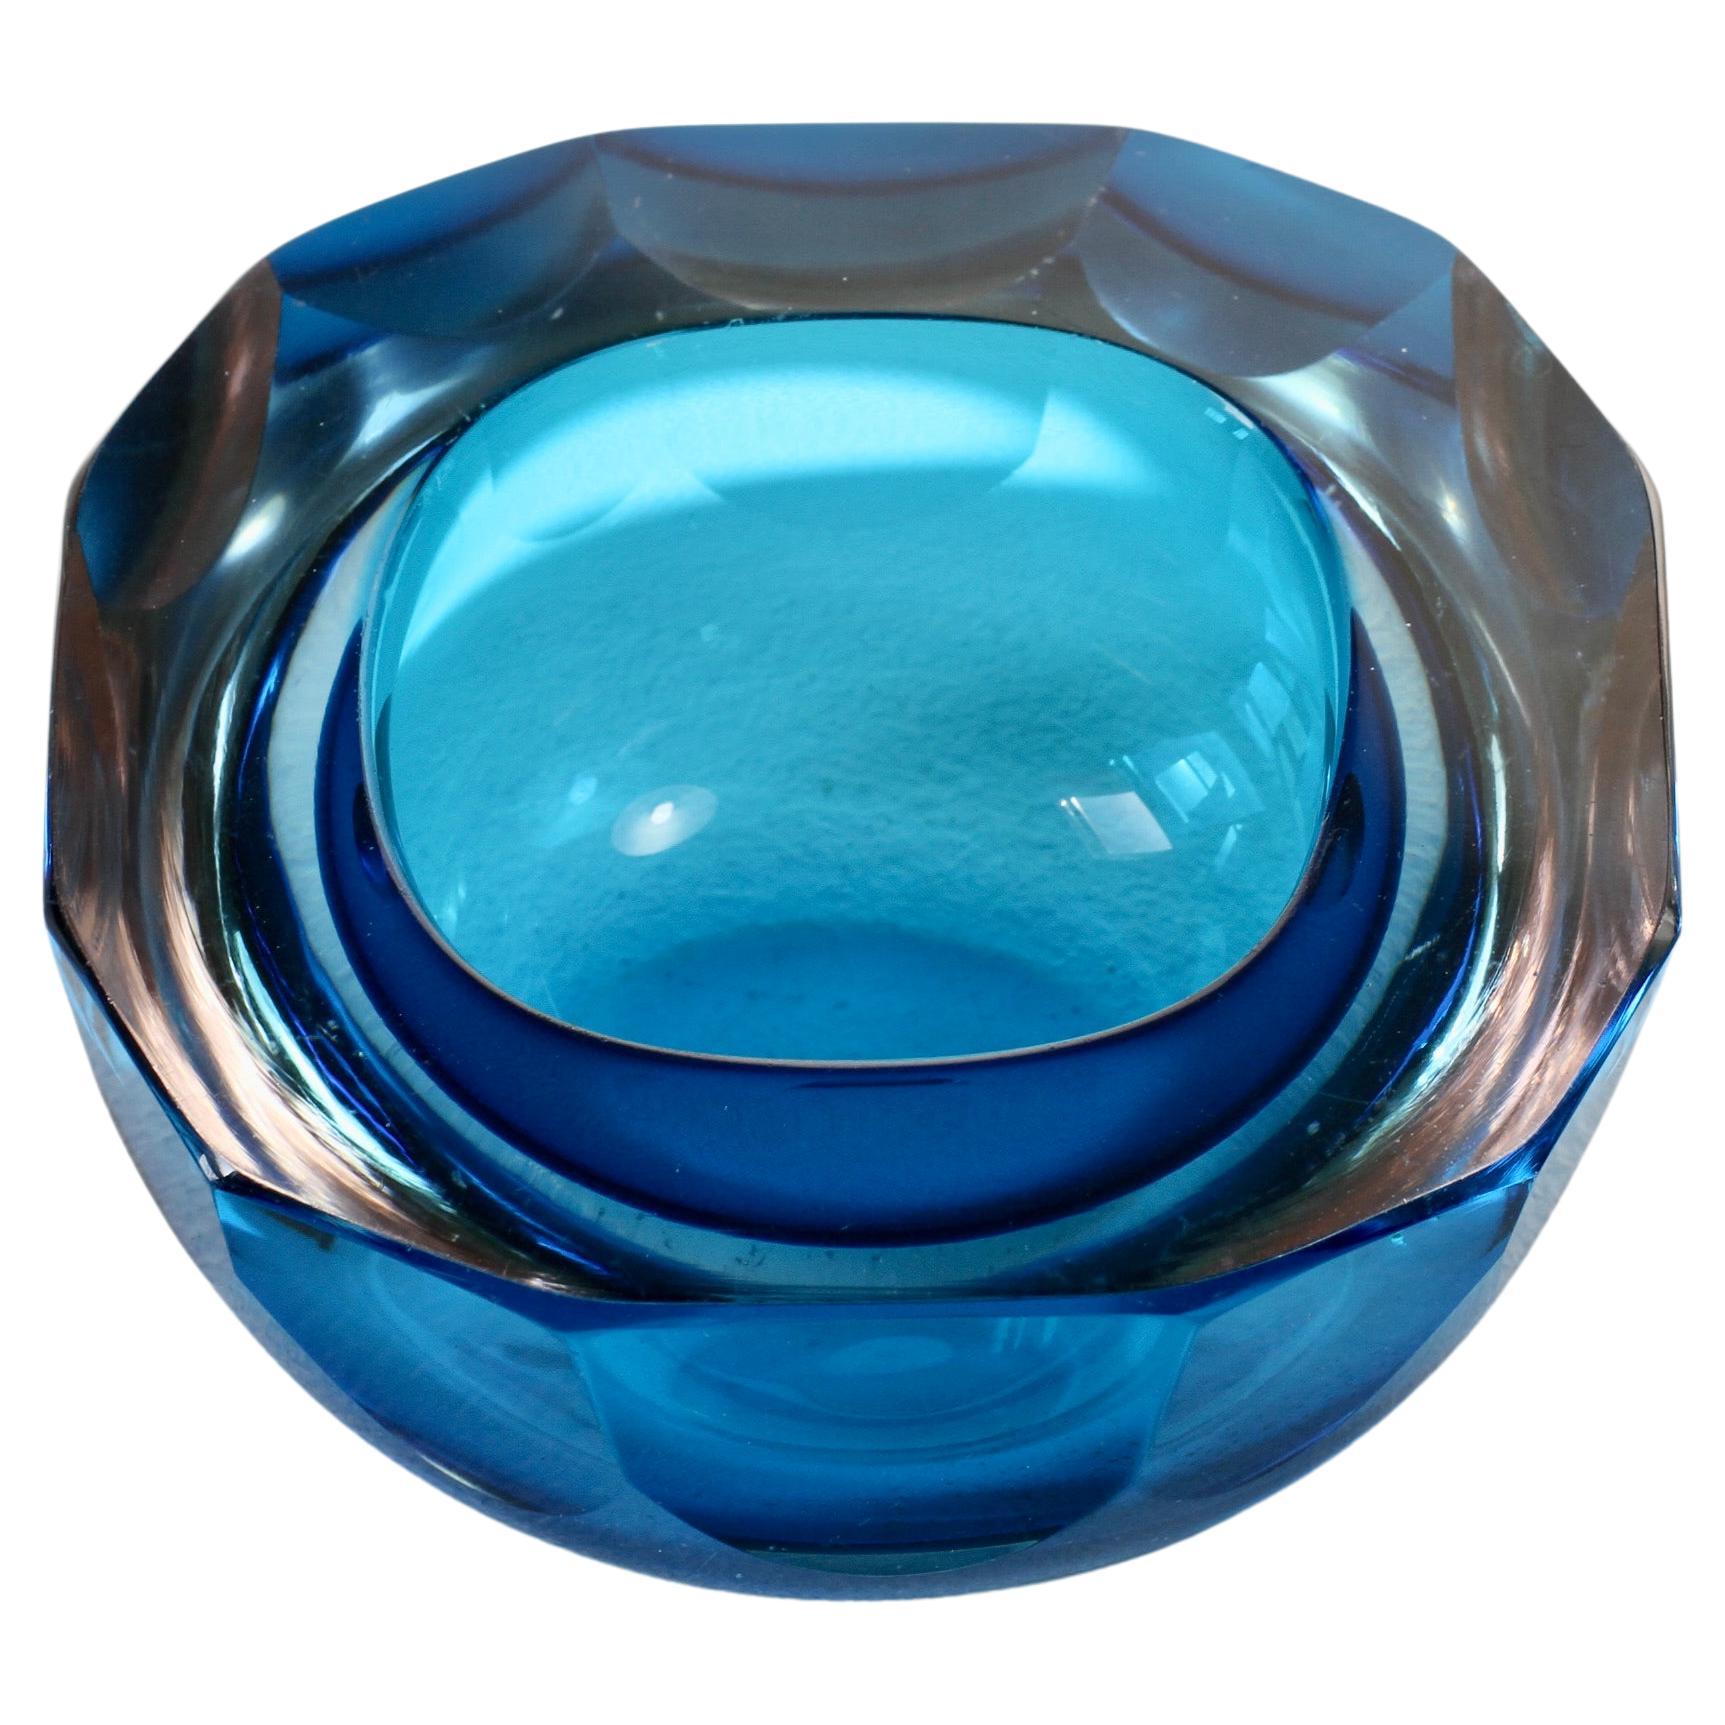 Faceted Blue Murano Midcentury Modern 1960s Sommerso Diamond Cut Glass Bowl For Sale